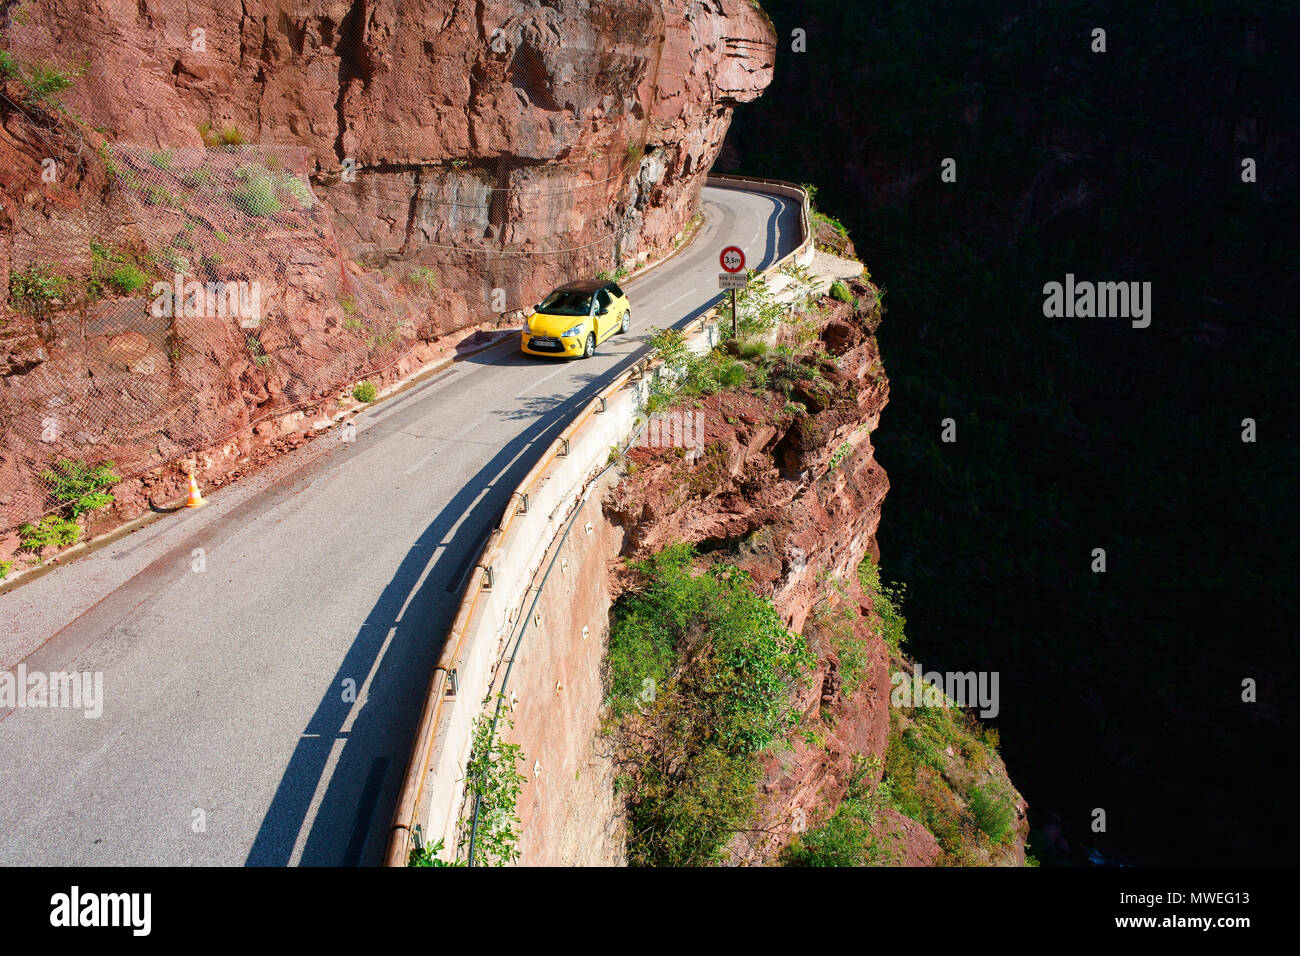 AERIAL VIEW from a 6-meter mast. Sports car on a narrow road inside a deep canyon. Gorges du Cians, French Riviera's hinterland, France. Stock Photo